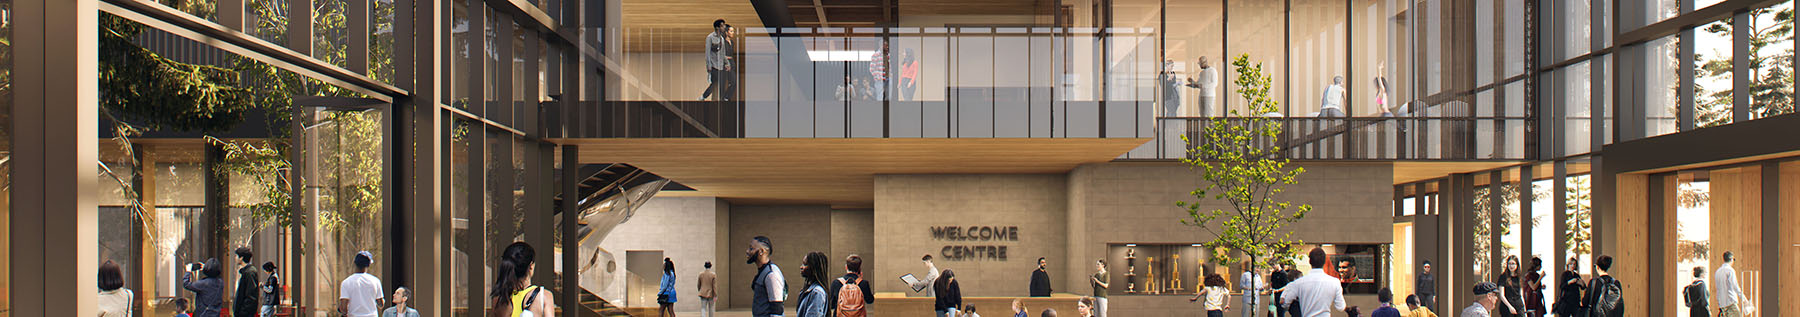 rendering of new Harry Jerome Community Centre interior